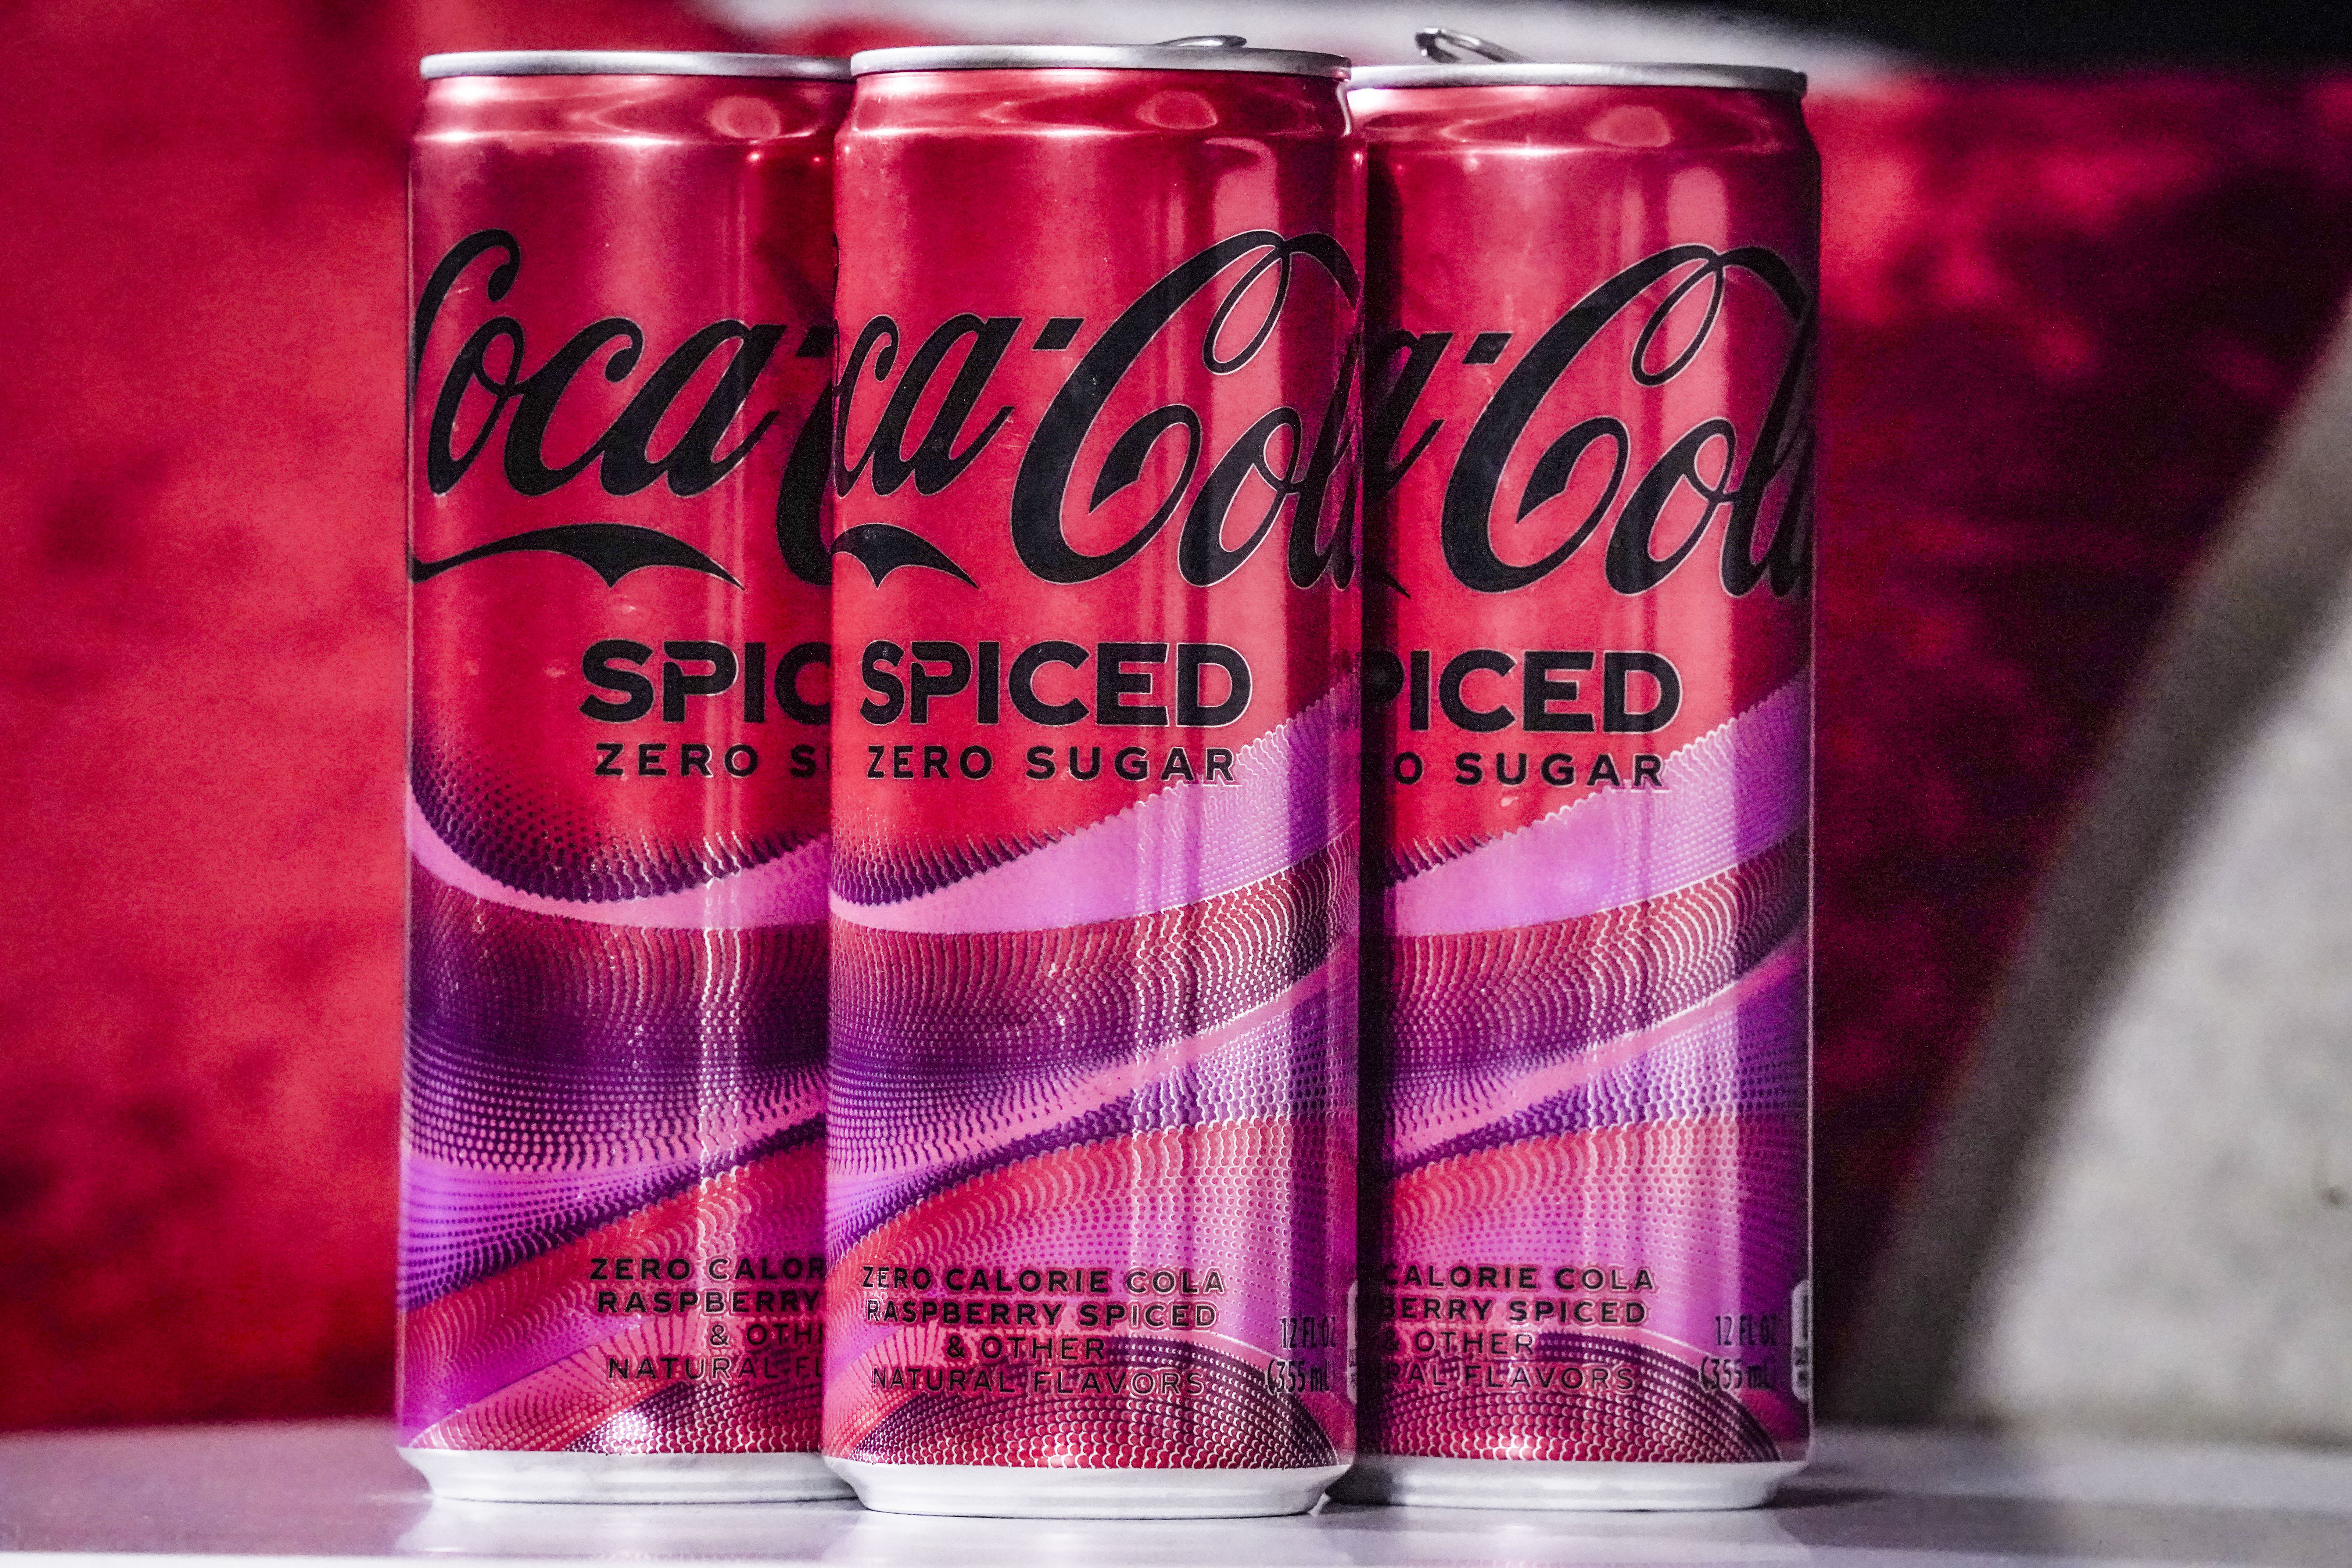 Coca-Cola adds limited-edition drink made by artificial intelligence, News